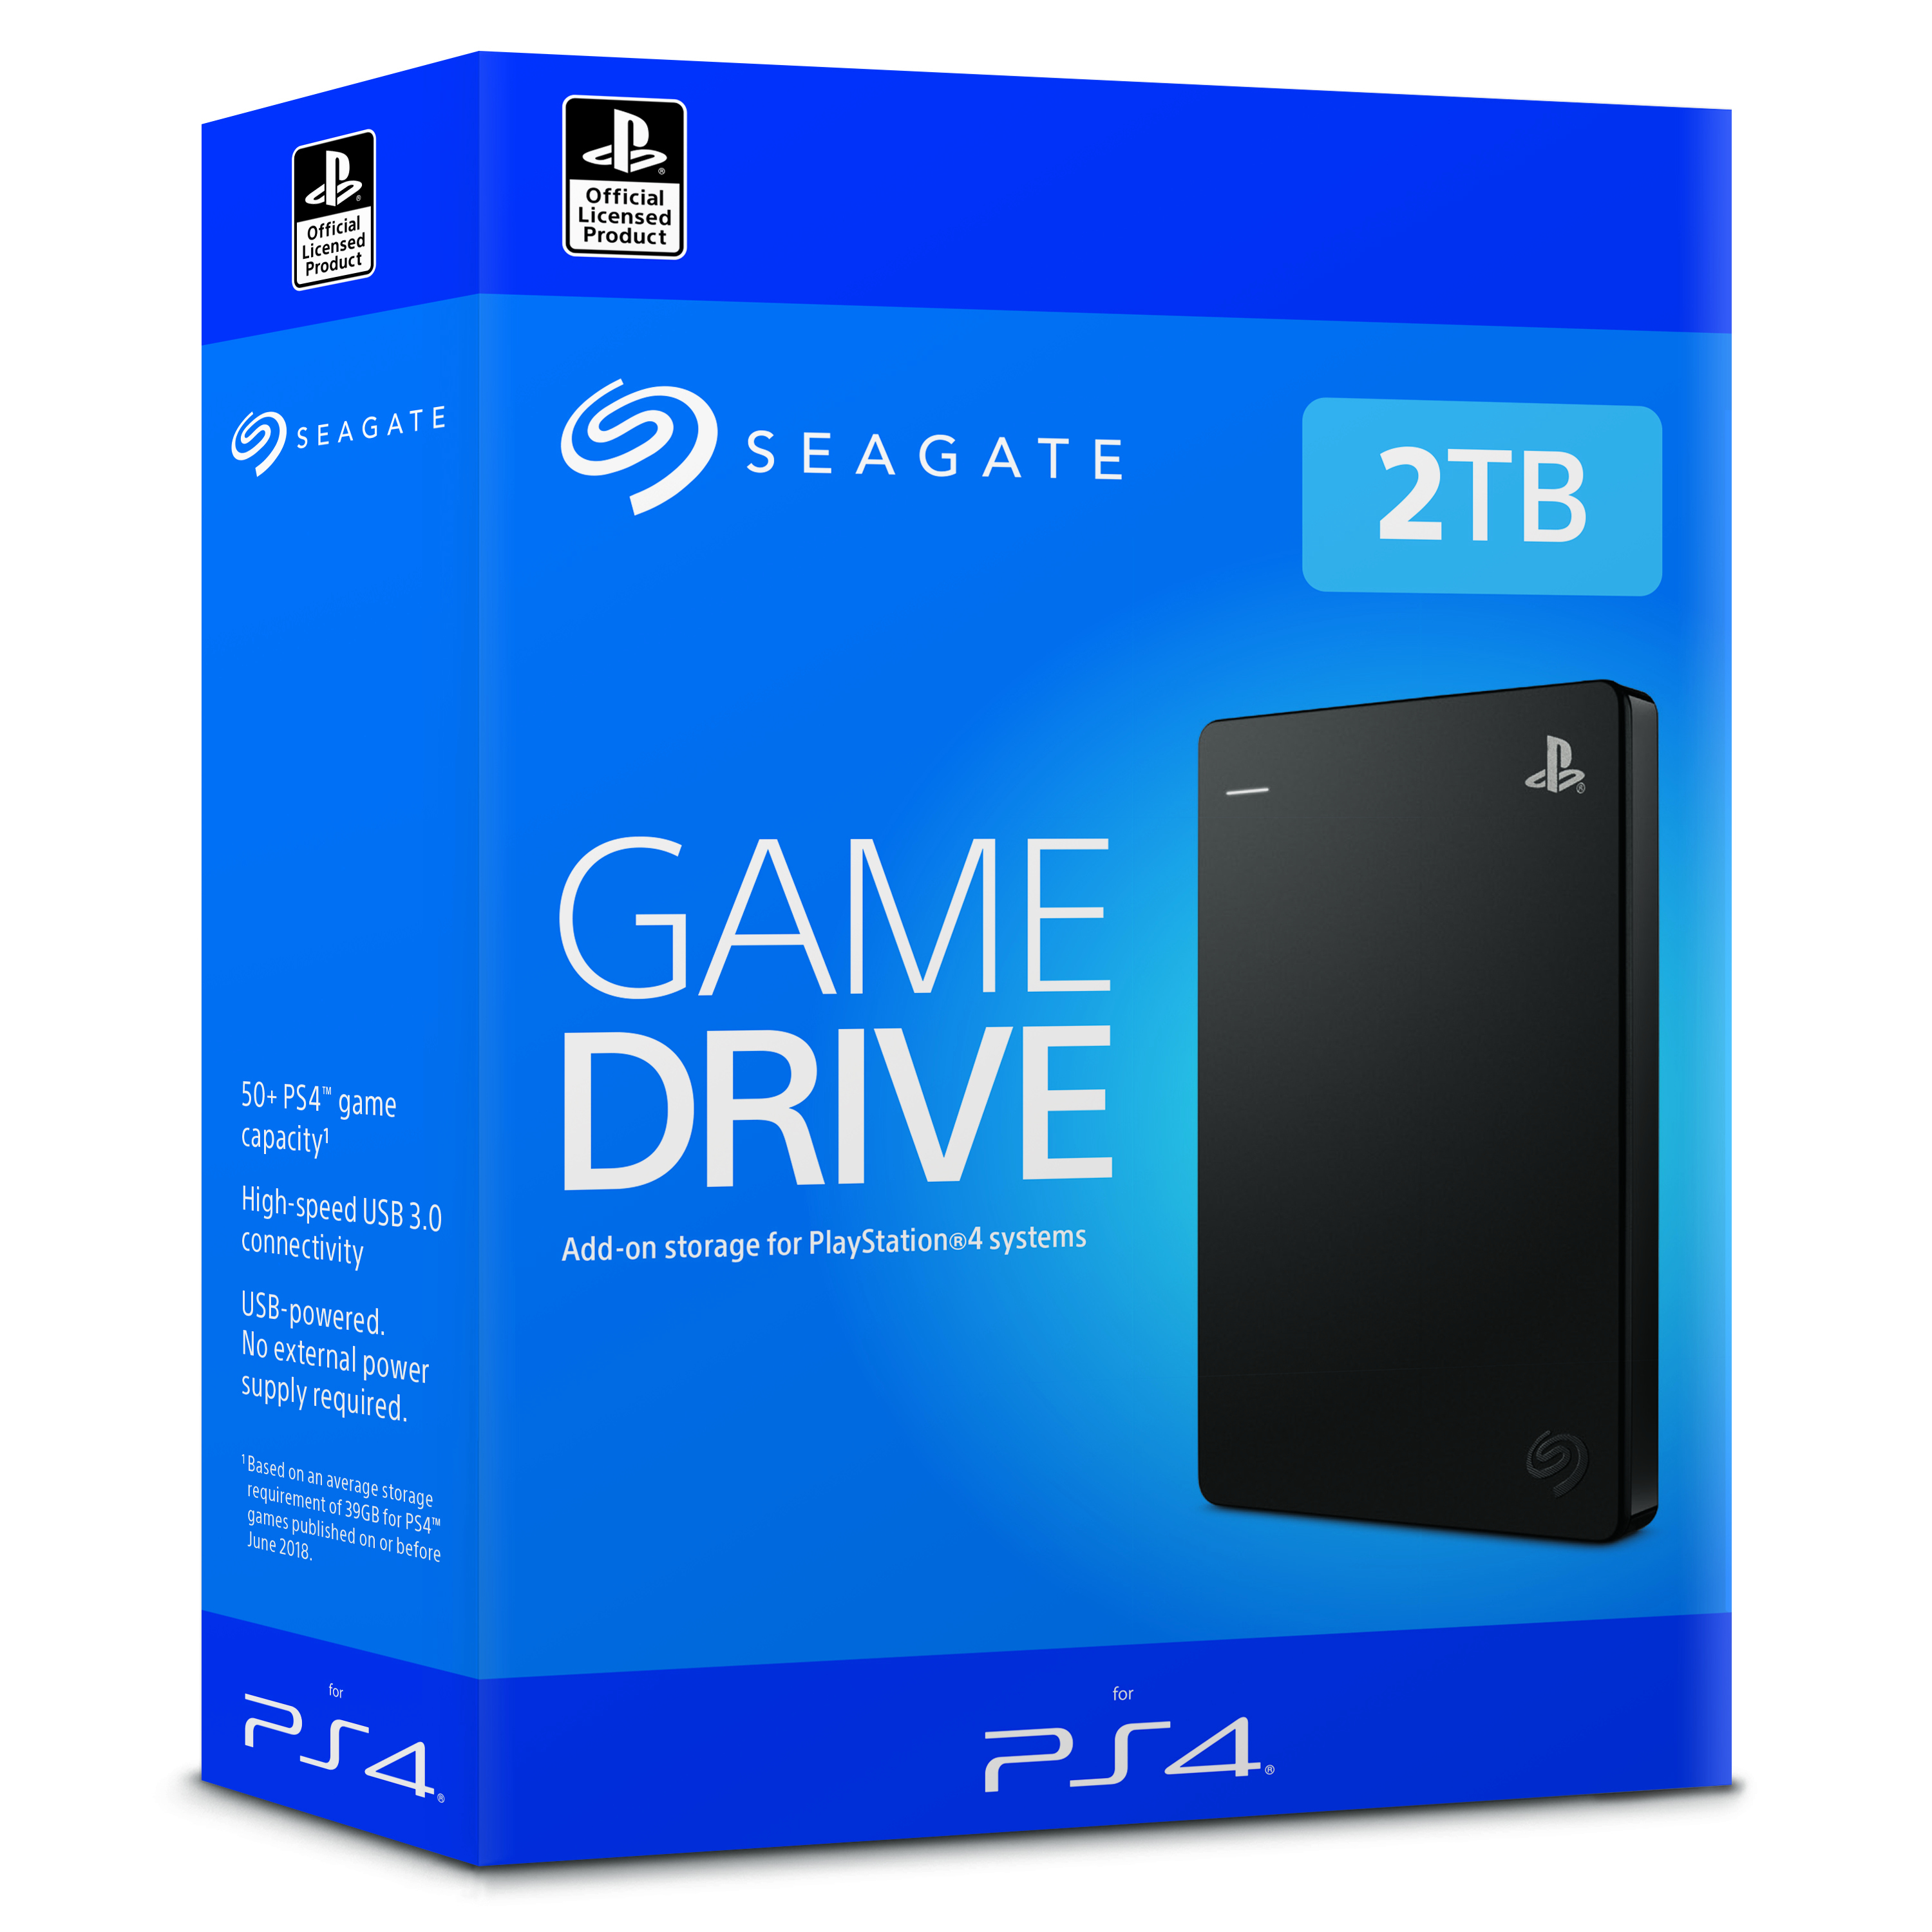 Seagate STGD2000200 | Seagate Game Drive for PS4 STGD2000200 - Festplatte - 2  TB - extern (tragbar)